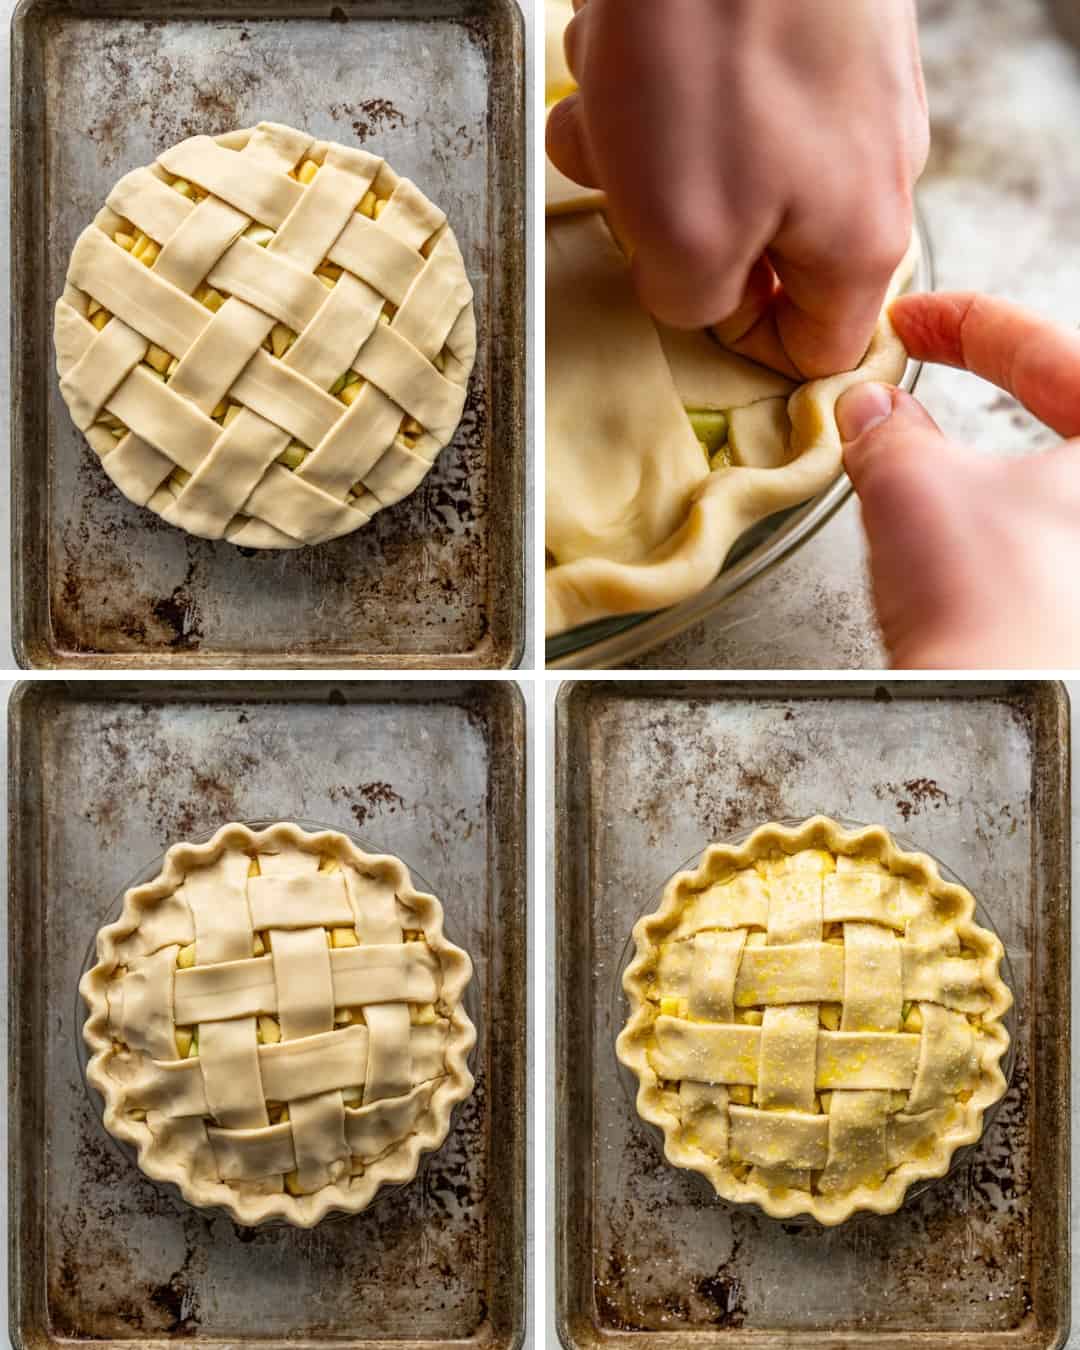 A collage of four images showing an overhead view of an unbaked apple pie with a lattice crust, crimping the edges of the top crust, the unbaked pie with the crimped edges, and before baking with the egg wash on top.